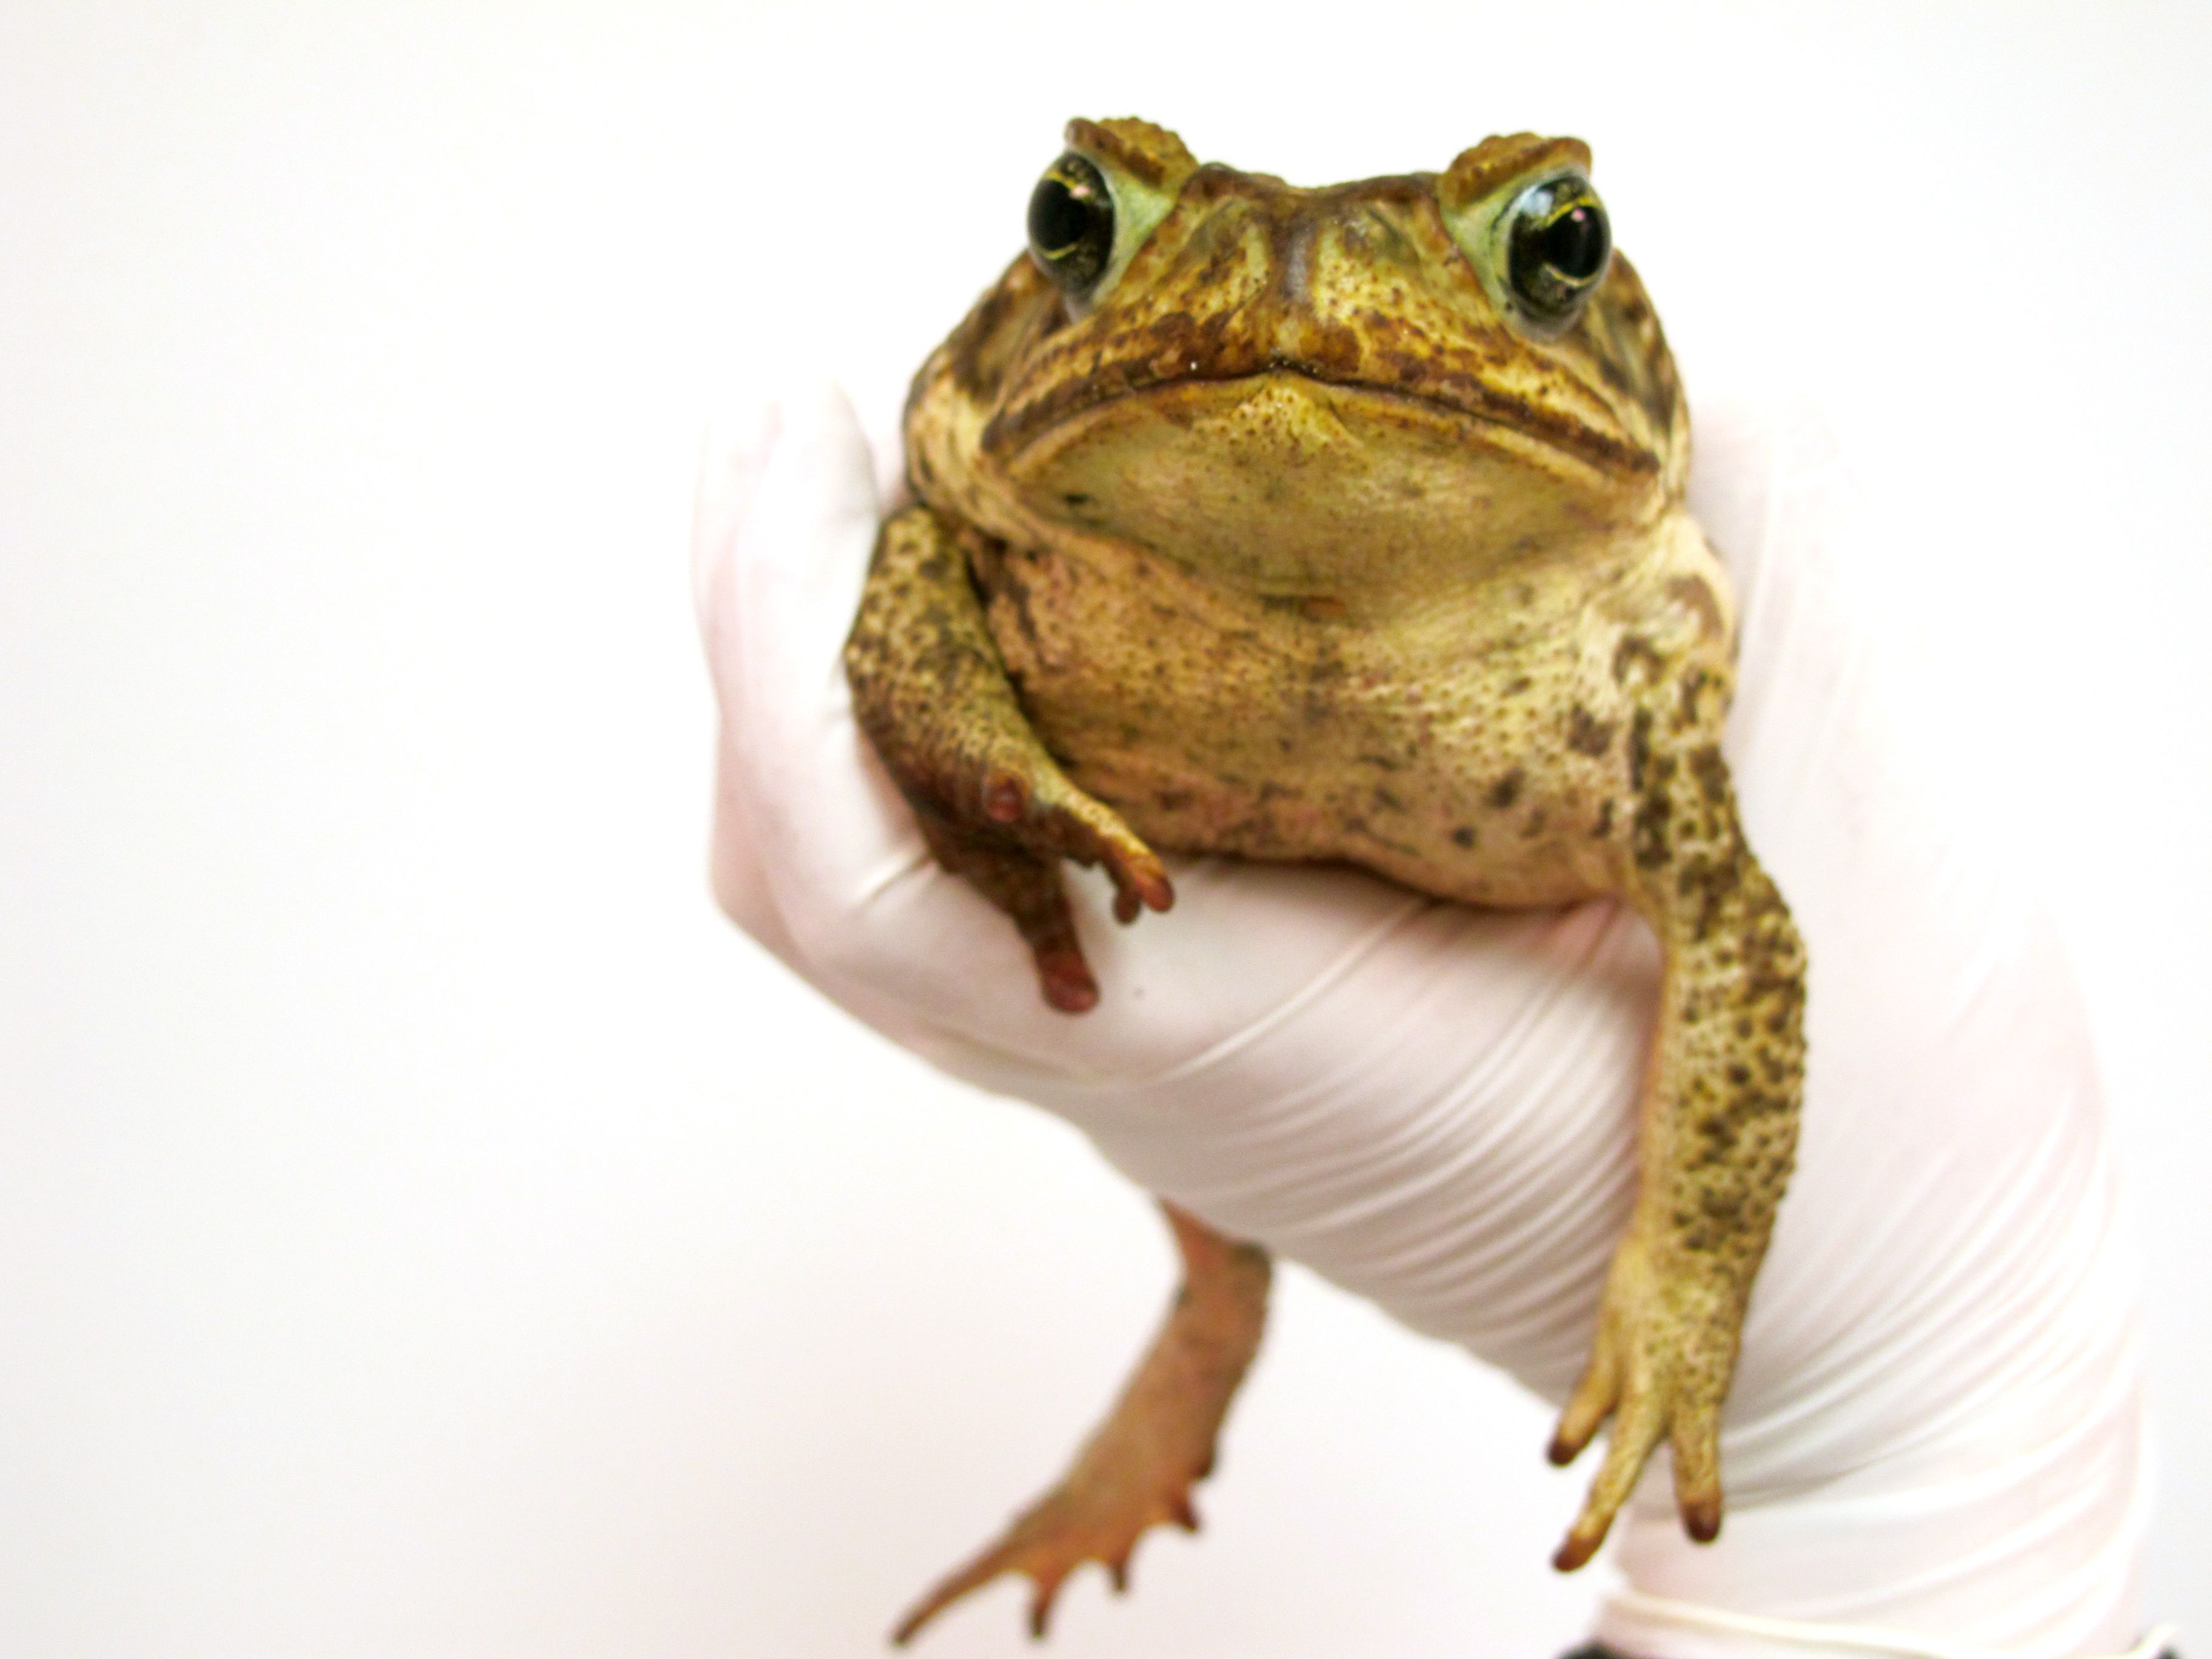 Cane Toad Wallpaper Background